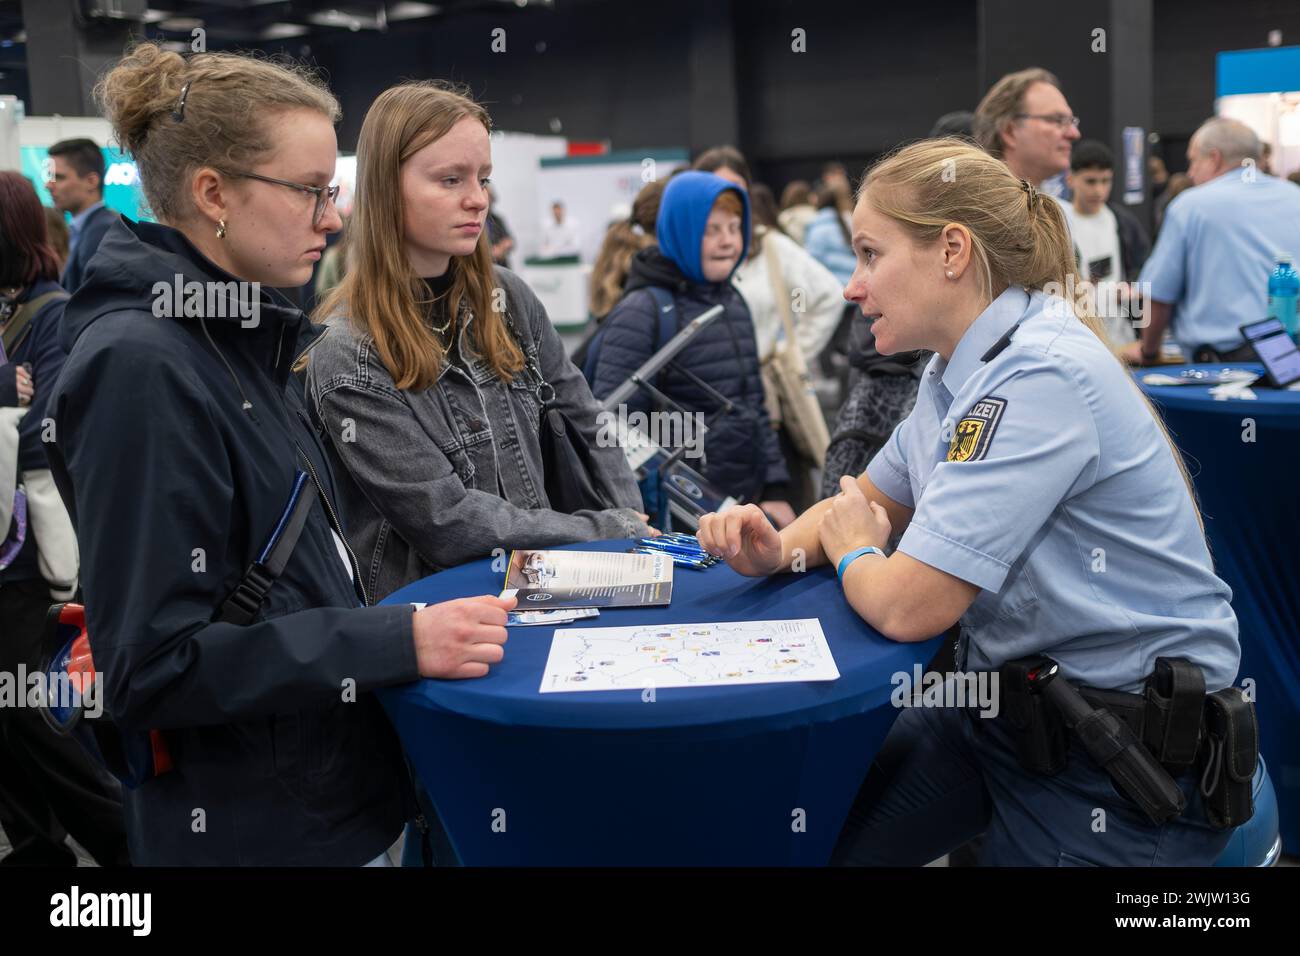 Career orientation fair EINSTIEG.. Police stand. The police are urgently looking for new recruits. Stock Photo